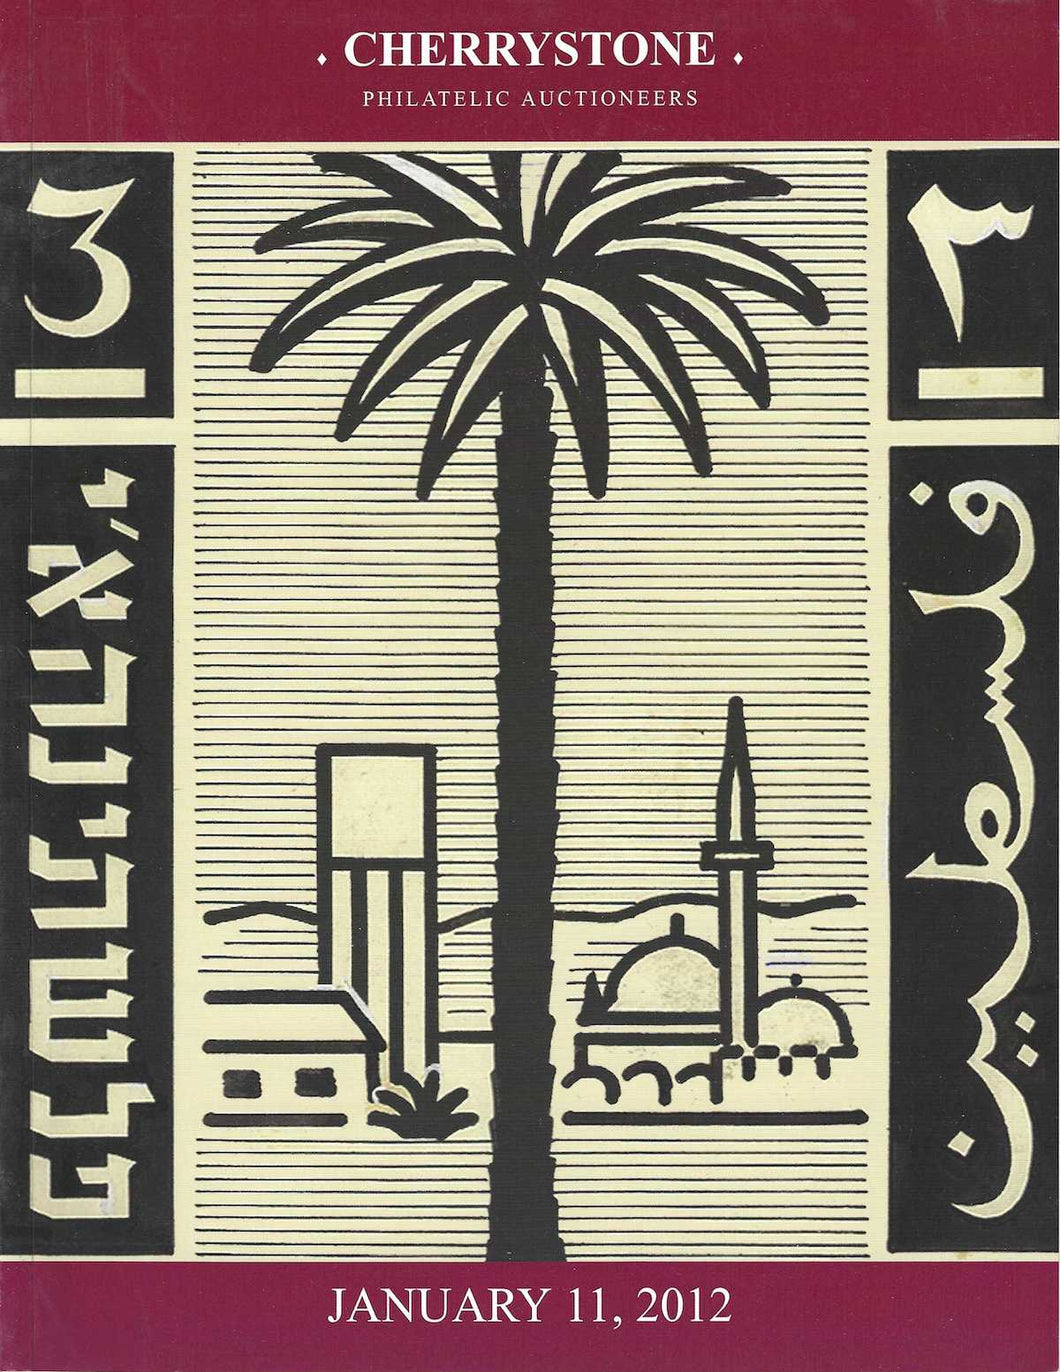 The Santa Fe Collection of Middle East 1918-1948, Cherrystone Philatelic Auctioneers, January 11, 2012